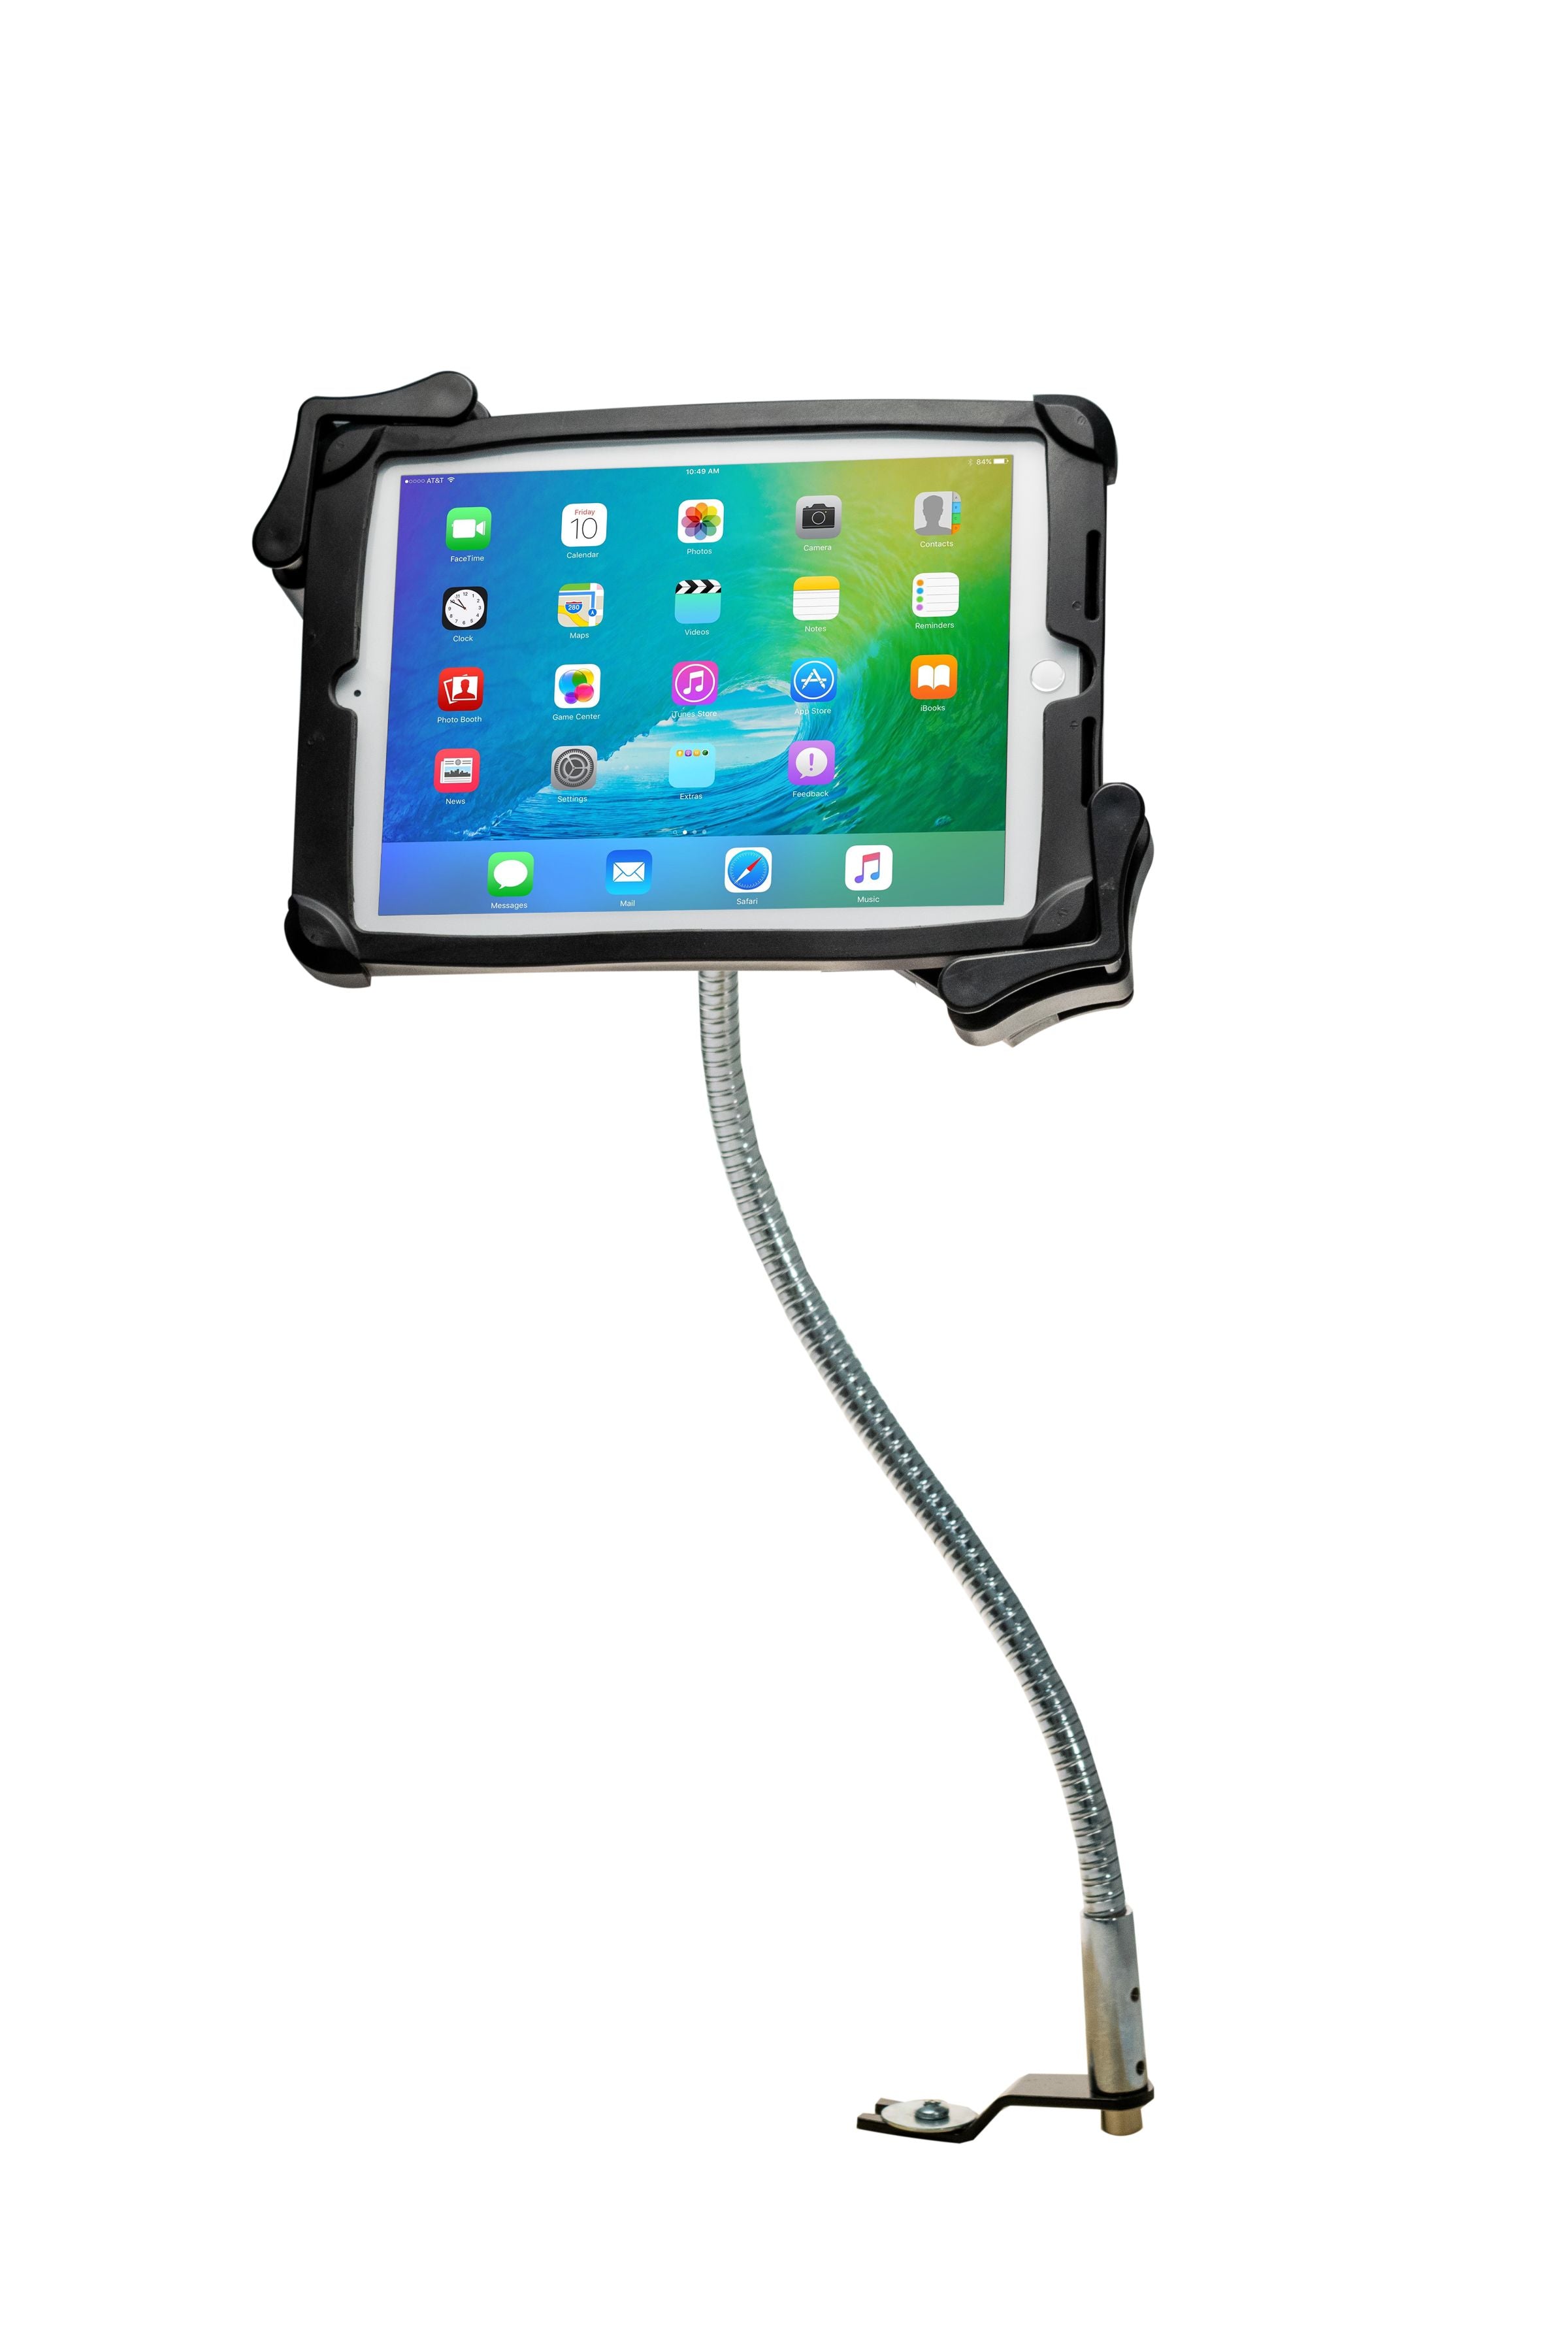 Gooseneck Car Mount for 7-14 Inch Tablets, including iPad 10.2-inch (7th/ 8th/ 9th Generation)